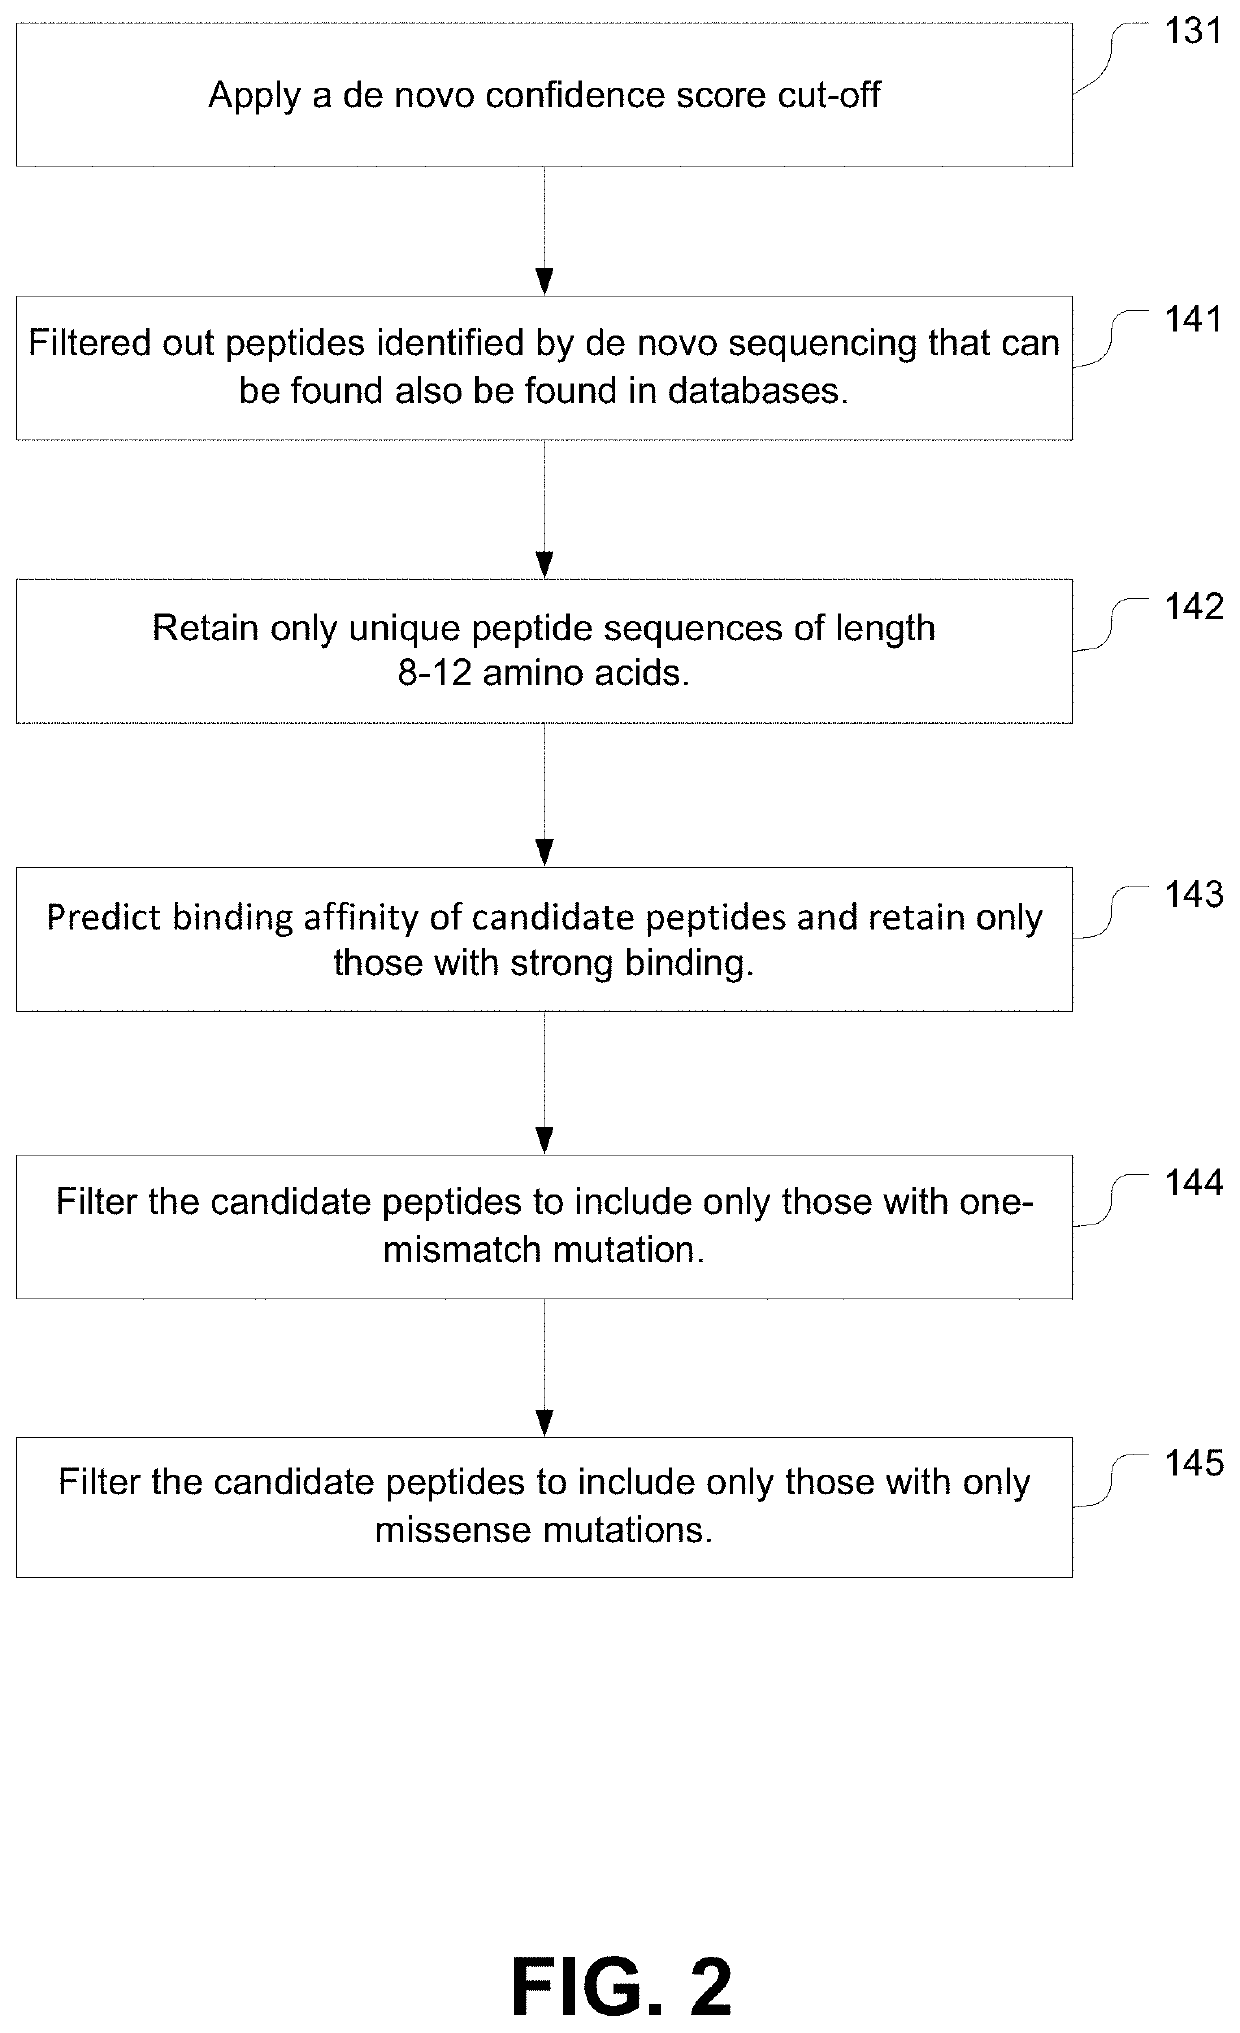 Systems and methods for patient-specific identification of neoantigens by de novo peptide sequencing for personalized immunotherapy